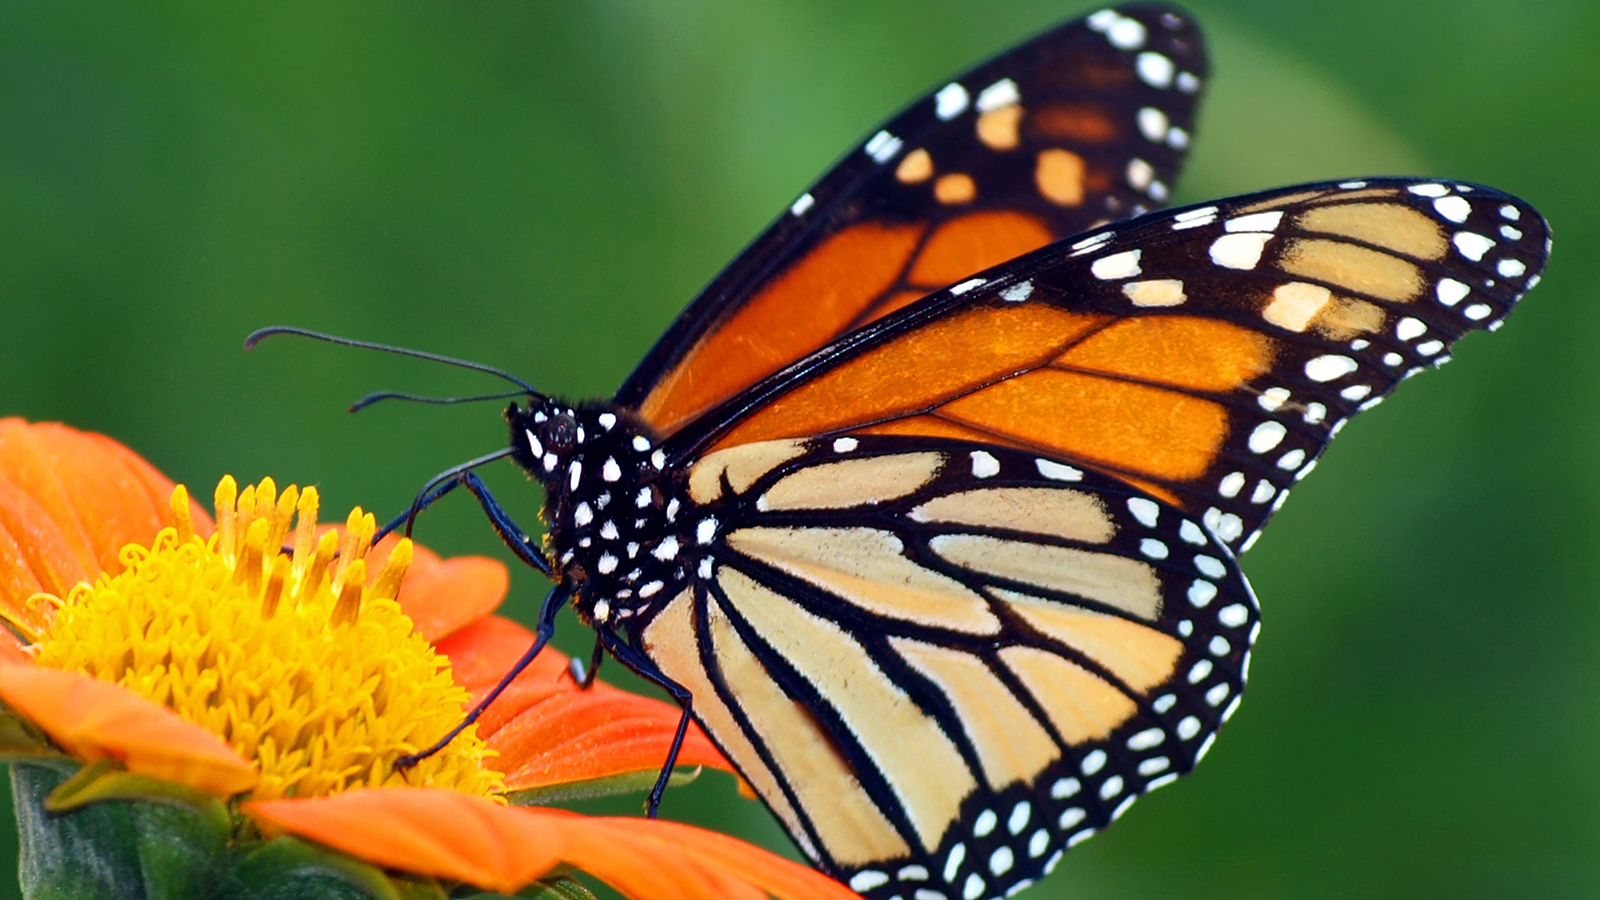 Monarch butterflies are making a big comeback in their winter habitat in Mexico